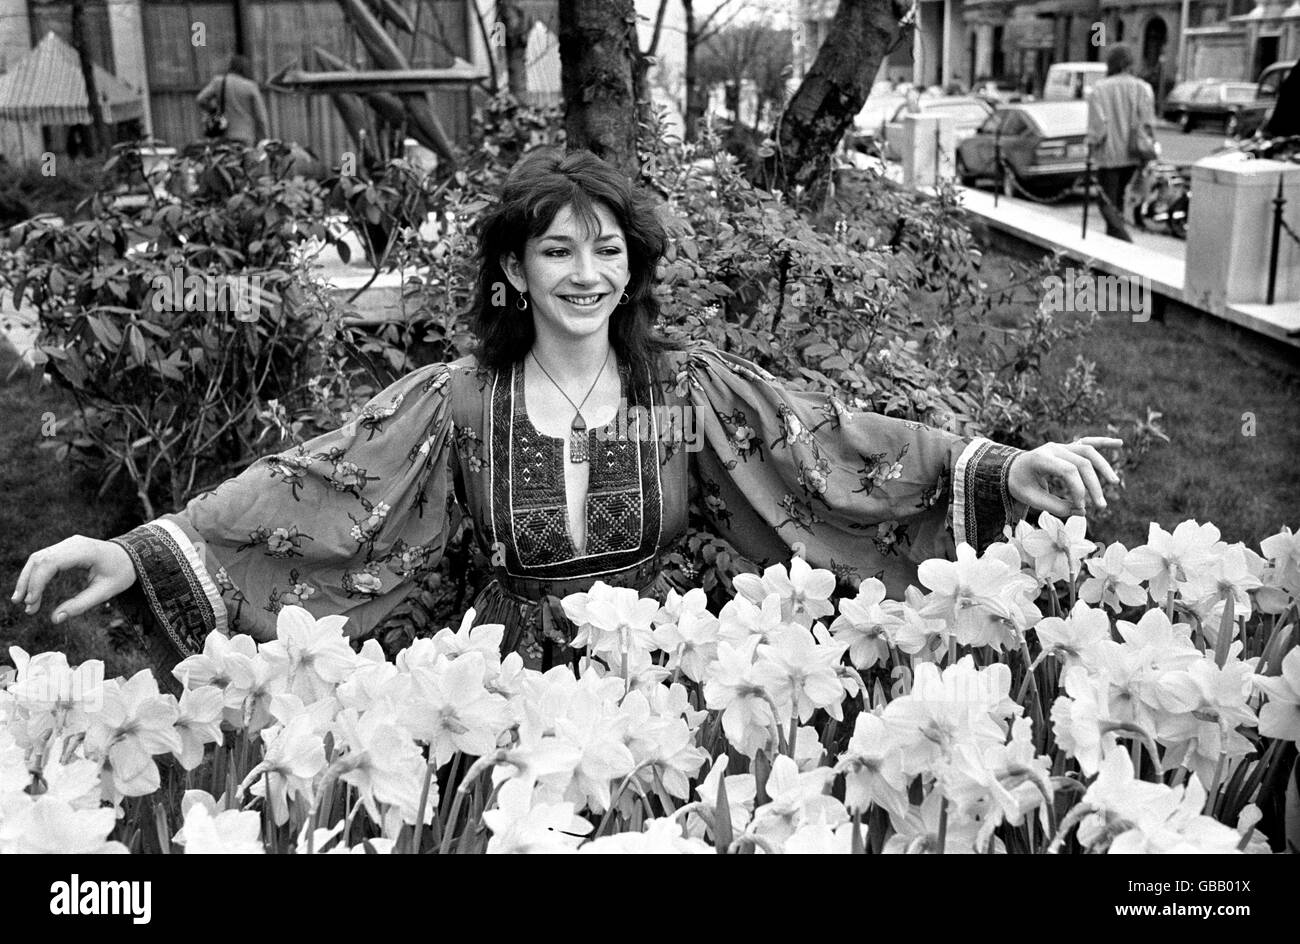 Music - Kate Bush - 1979. British singer and song writer Kate Bush, pops up from the daffodils at the Inn-on-the-Park, London Stock Photo